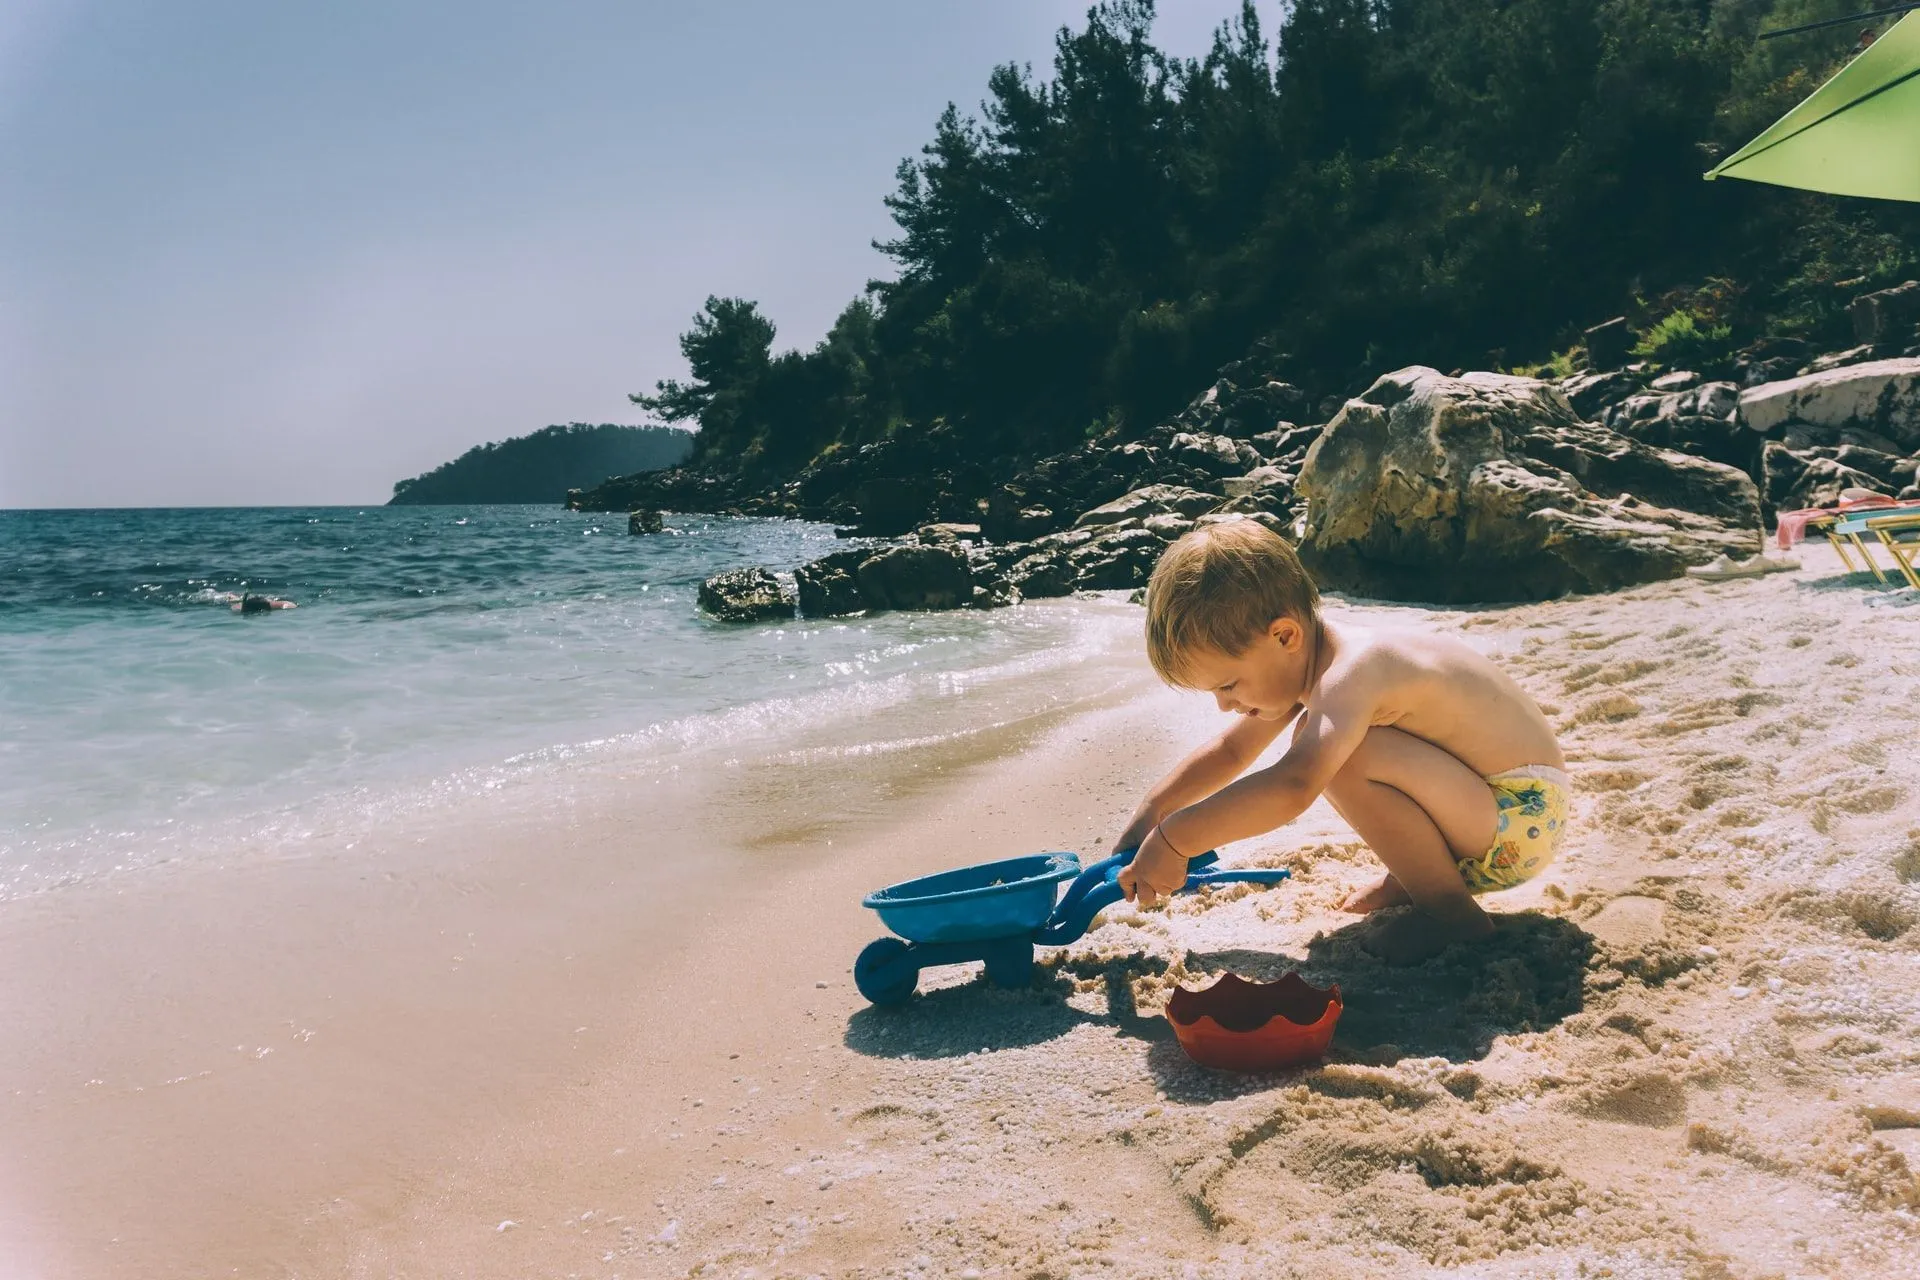 A toddler playing in sand on beach